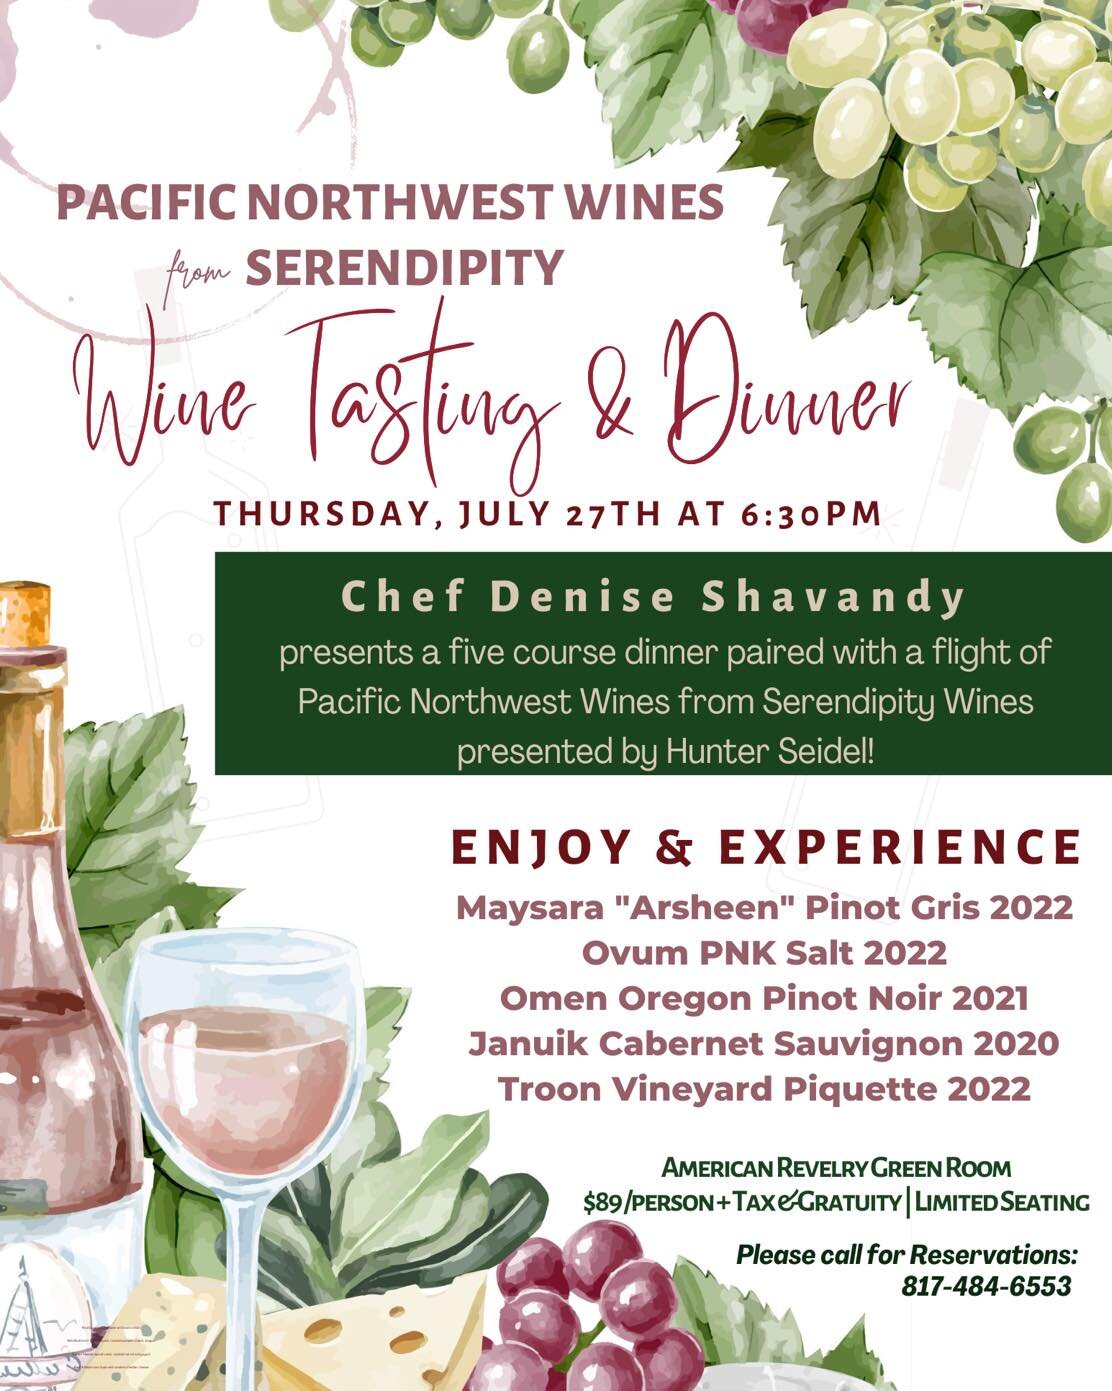 Don&rsquo;t forget to make your reservations for the Wine Tasting &amp; Dinner coming up this week!!!

⏰ Thursday, July 27th and 6:30pm

🍷 Taste five Pacific Northwest Wines from Serendipity - very boutique wines with limited retail availability in 